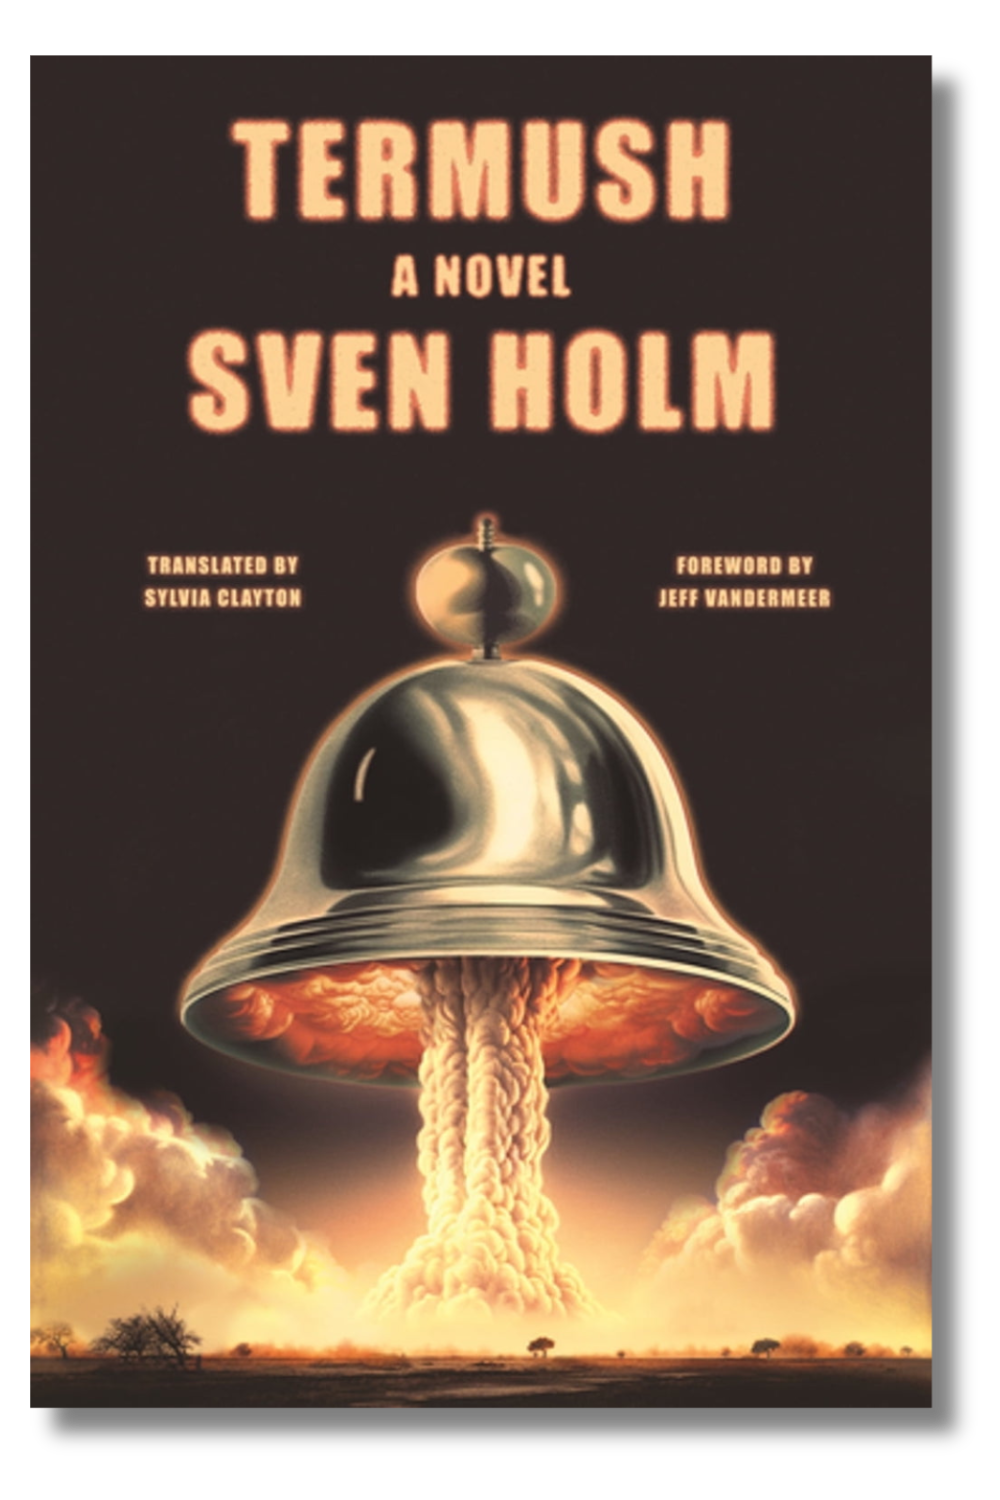 The cover of Sven Holm's "Termush," tr. by Sylvia Clayton